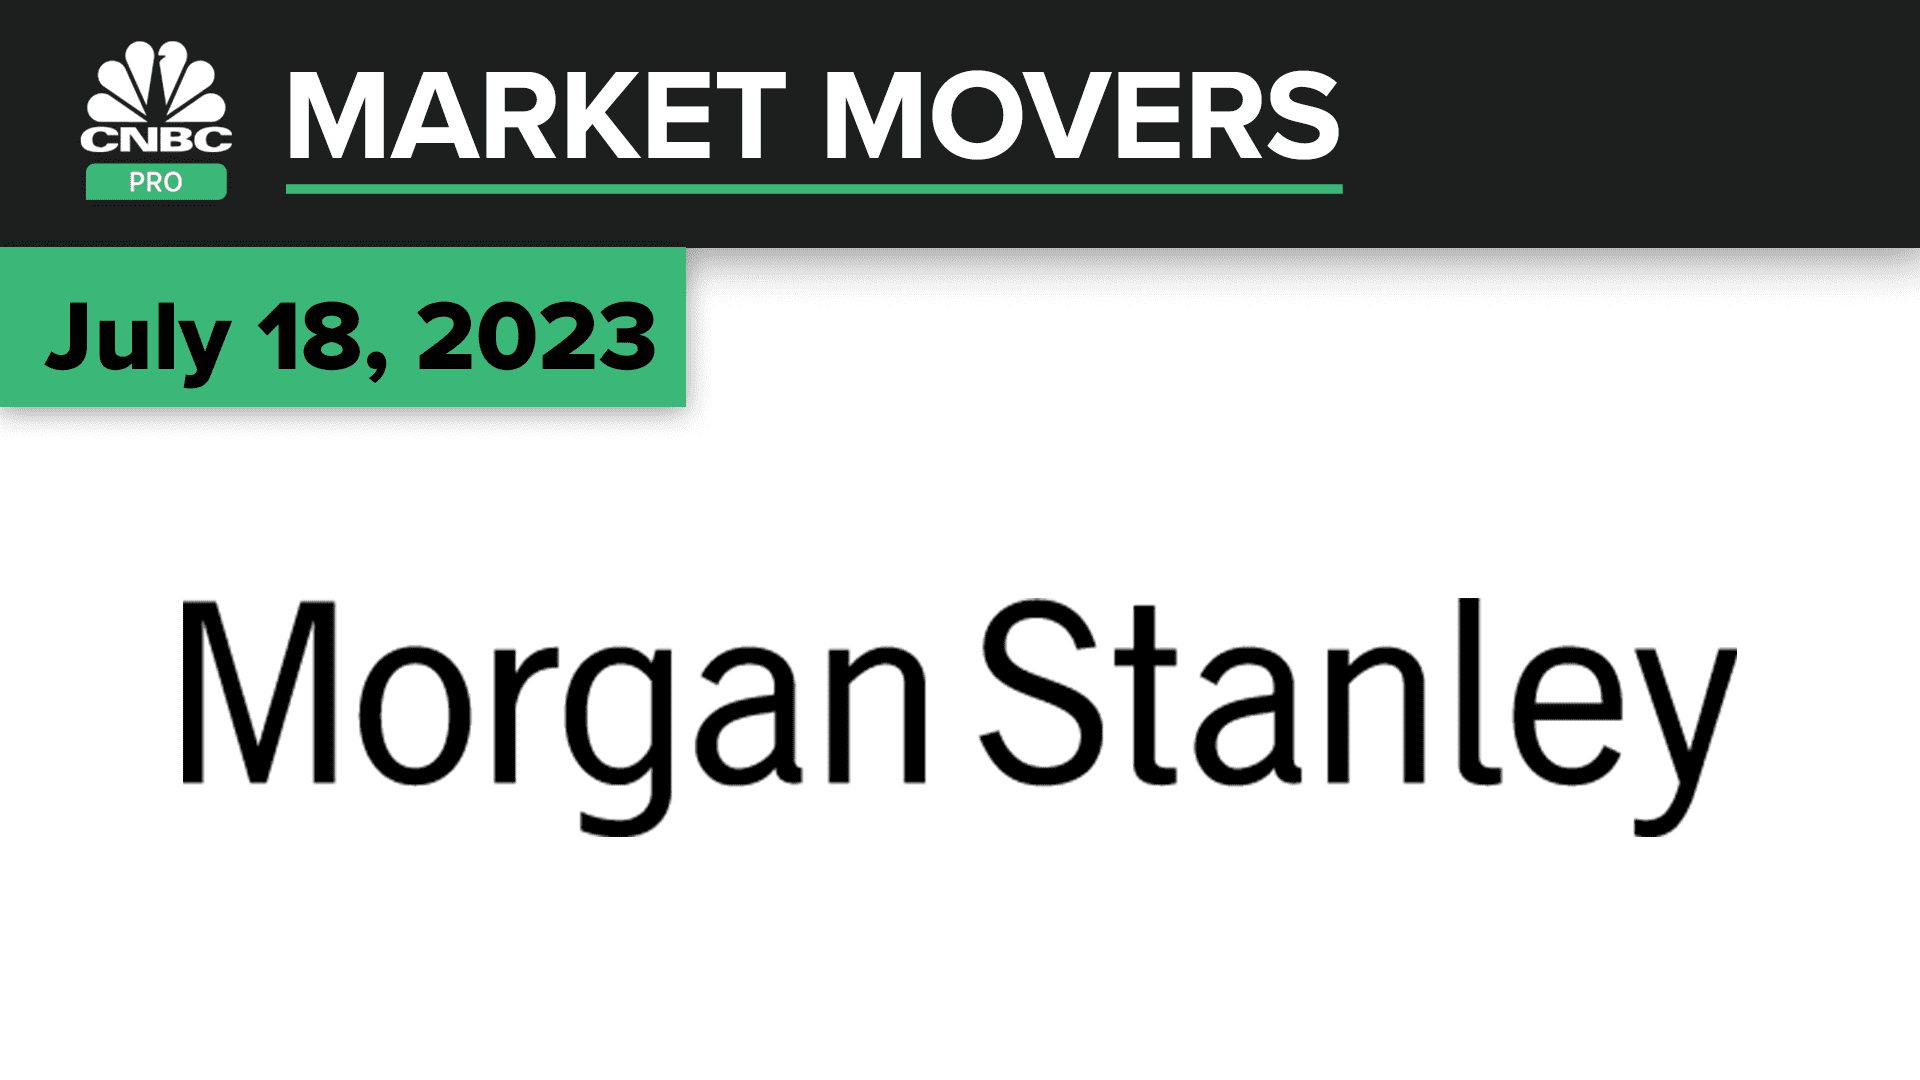 Morgan Stanley stock surges after earnings beat. Here's what the pros are saying